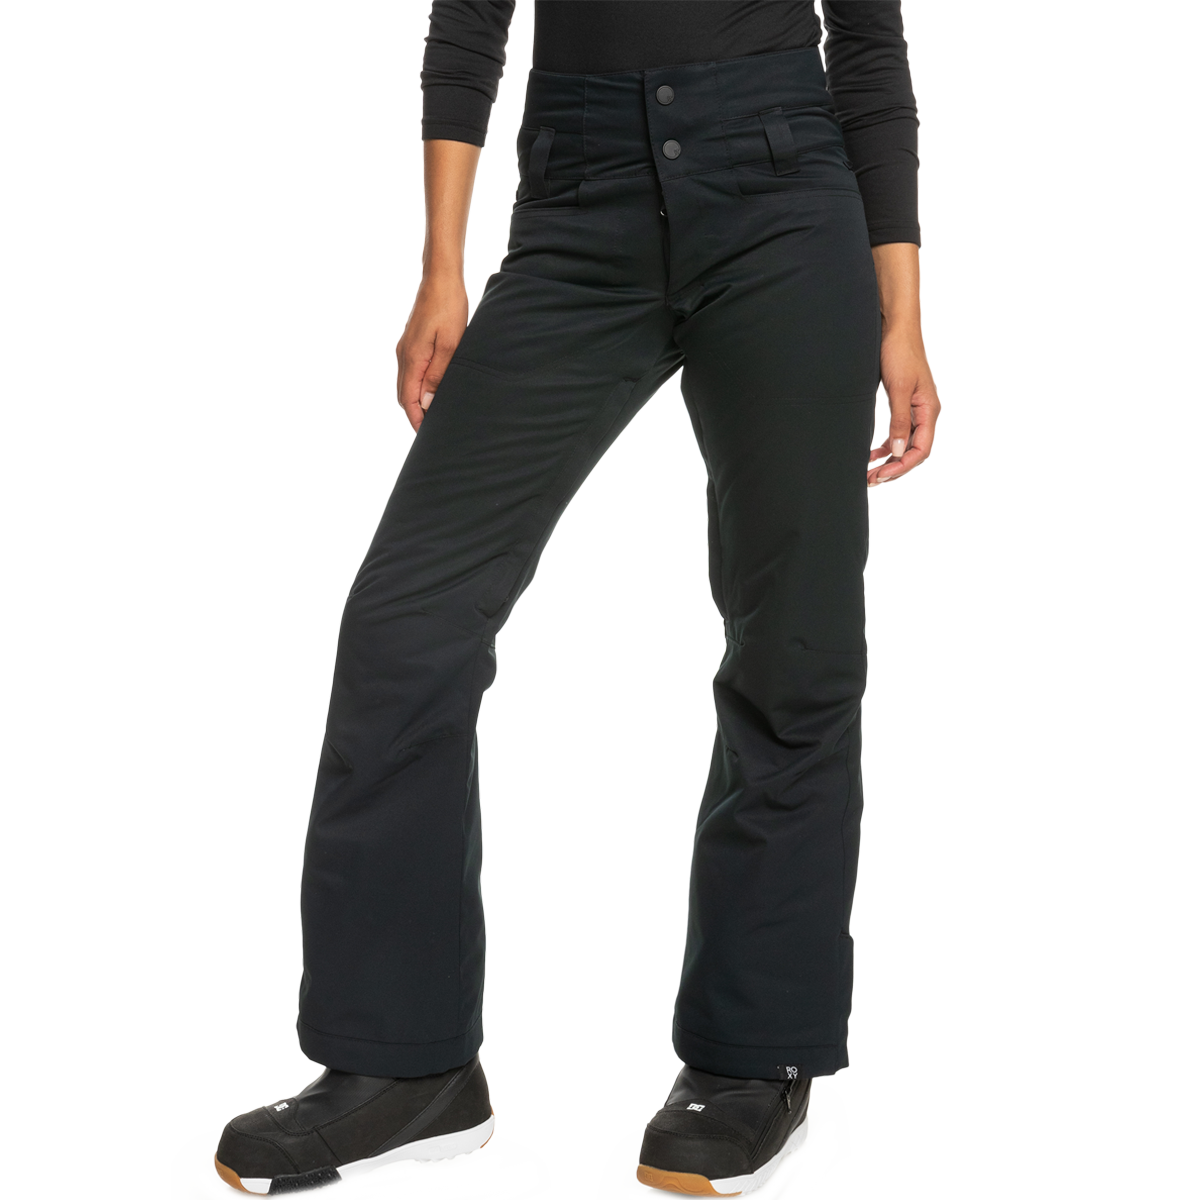 Women's Diversion Insulated Pant alternate view